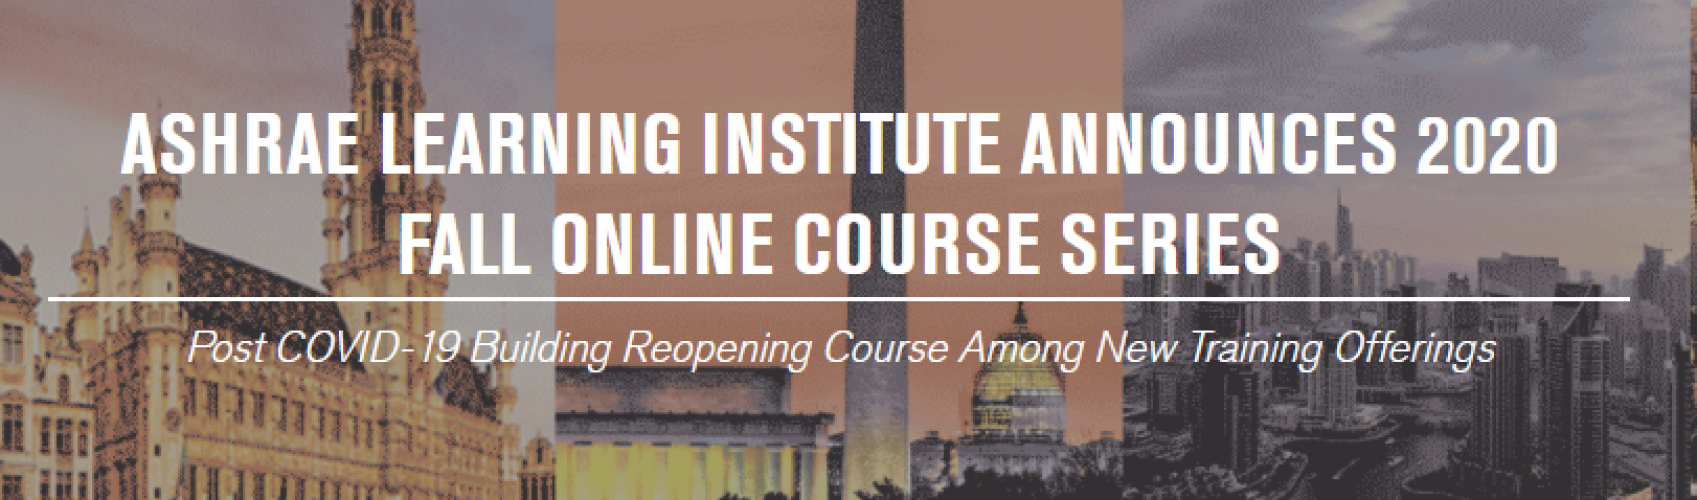 ashrae-learning-institute-announces-2020-fall-online-course-series